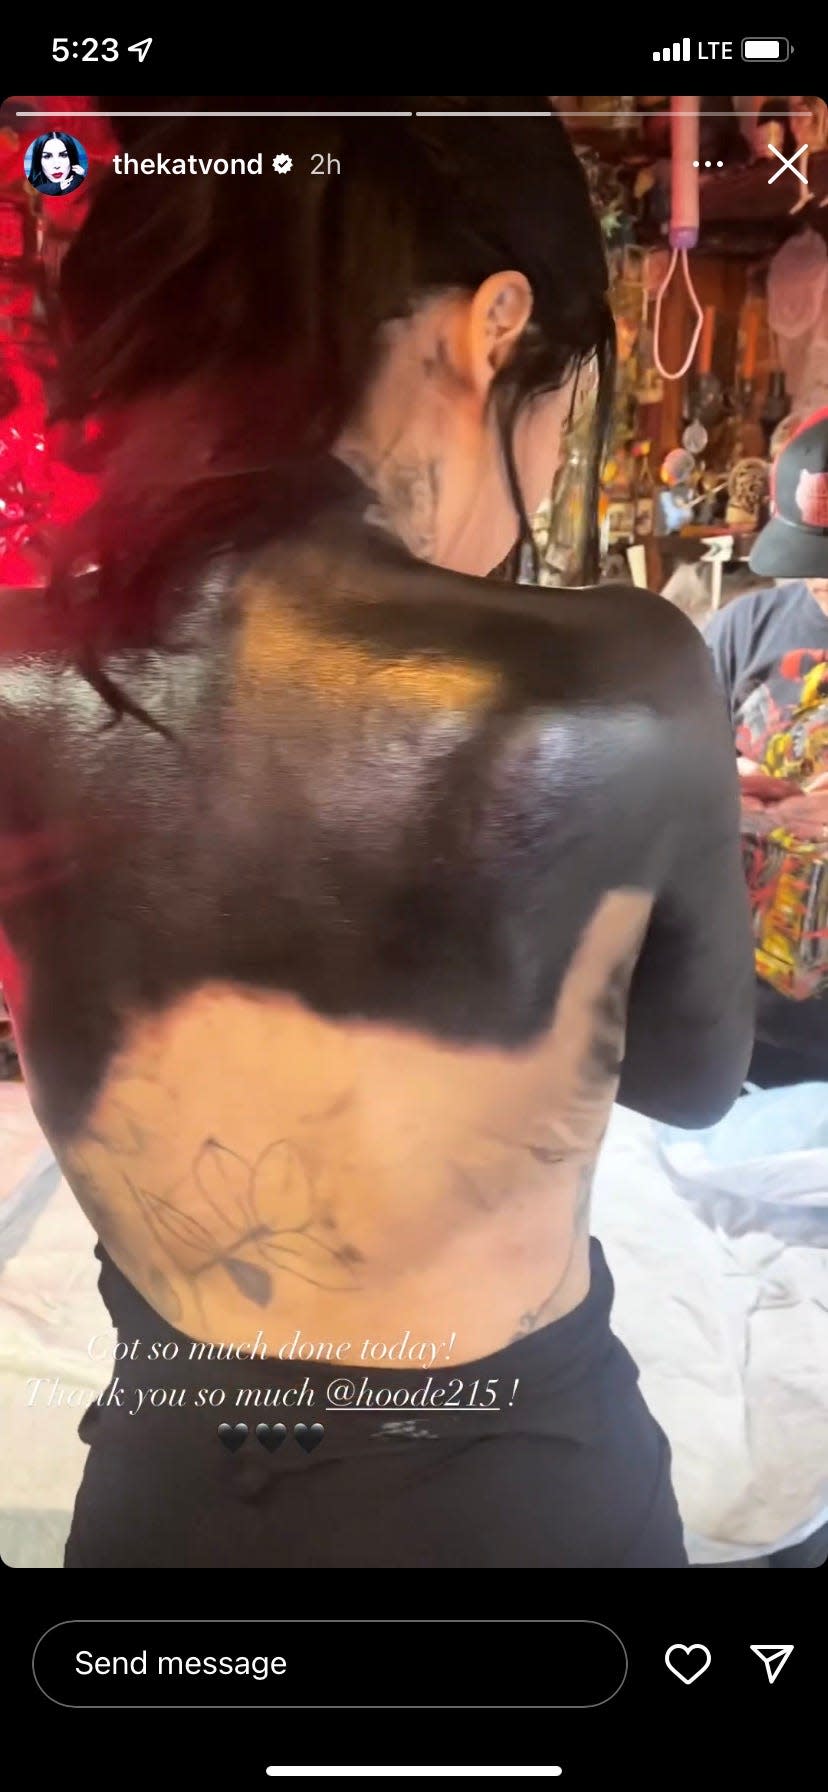 Kat Von D shows her covered back tattoos in an Instagram story.